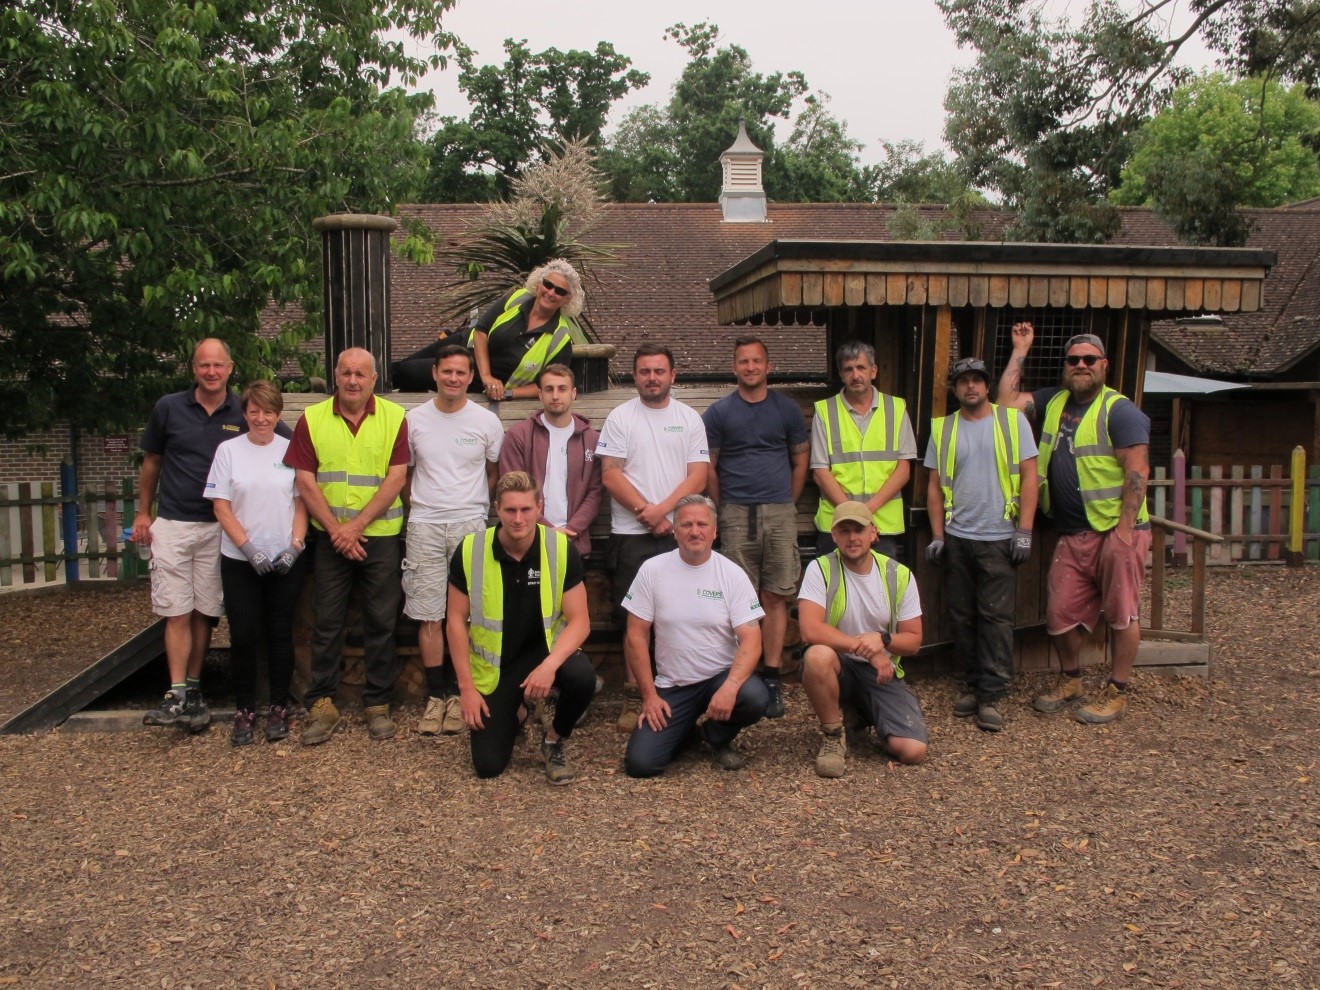 Covers Help for the Community campaign brightens up Aldingbourne Country Centre